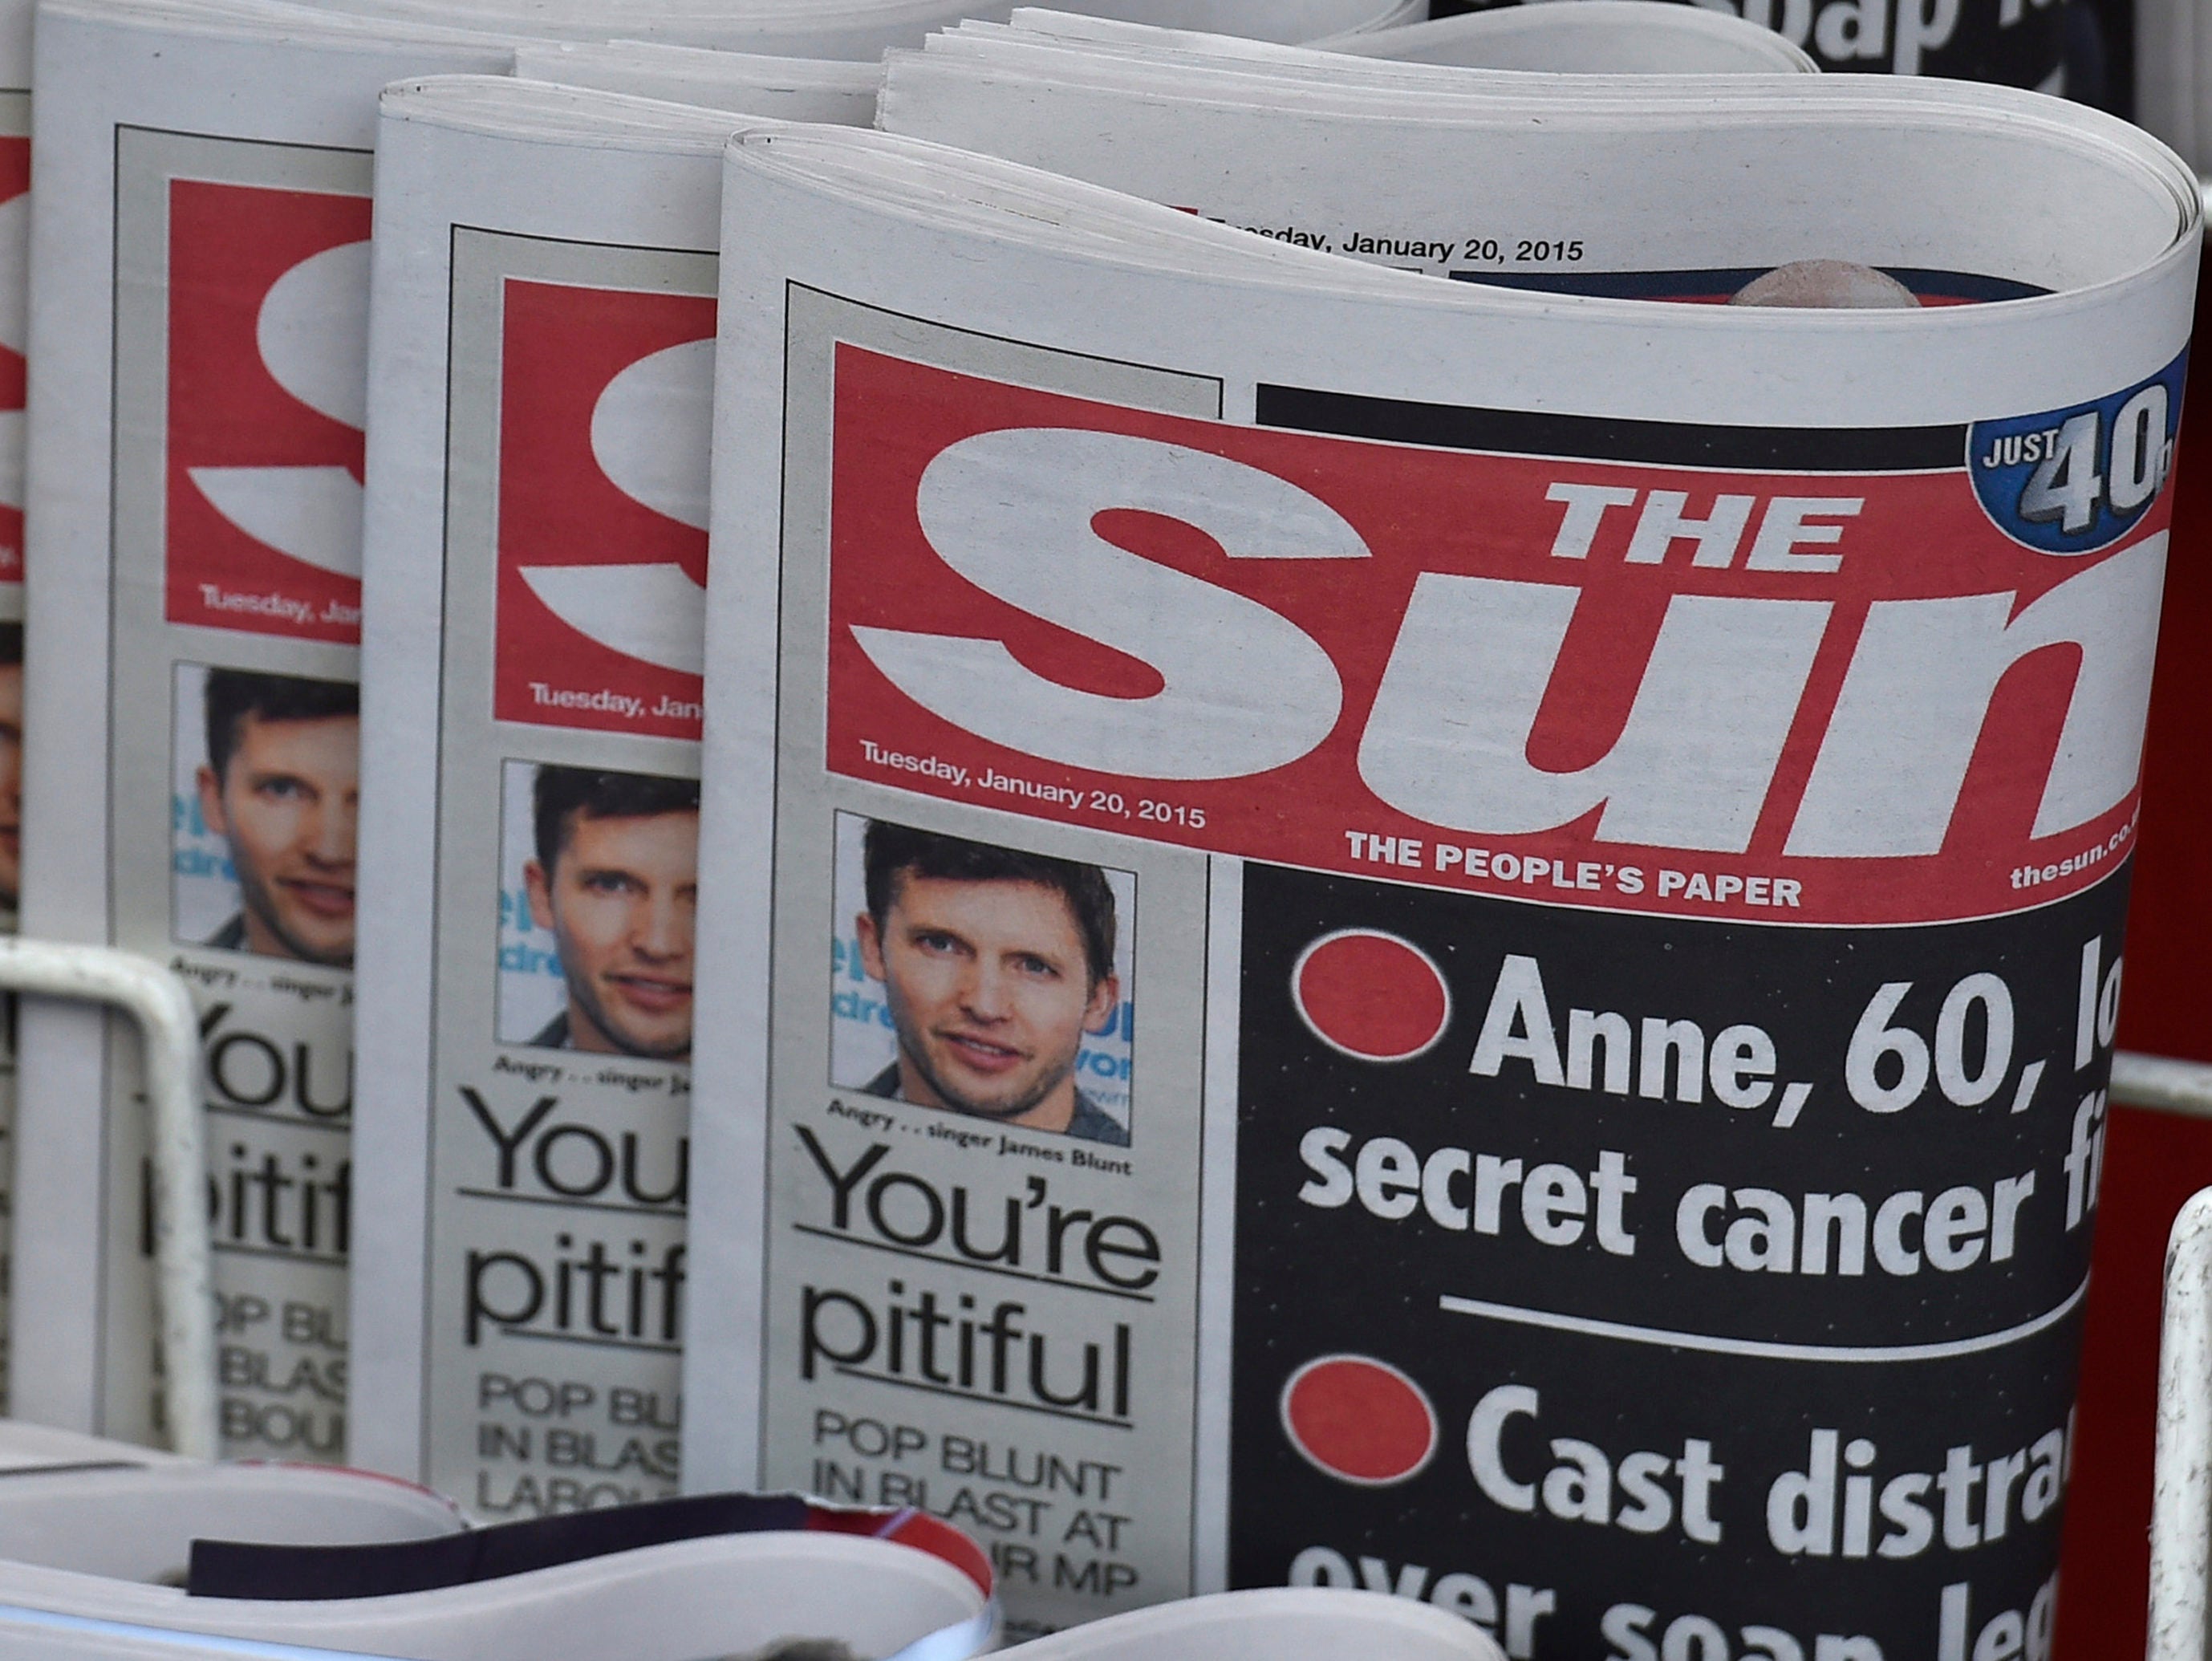 News UK reveals gender pay gap of 15.2 per cent rising to 24.8 per cent at The Sun